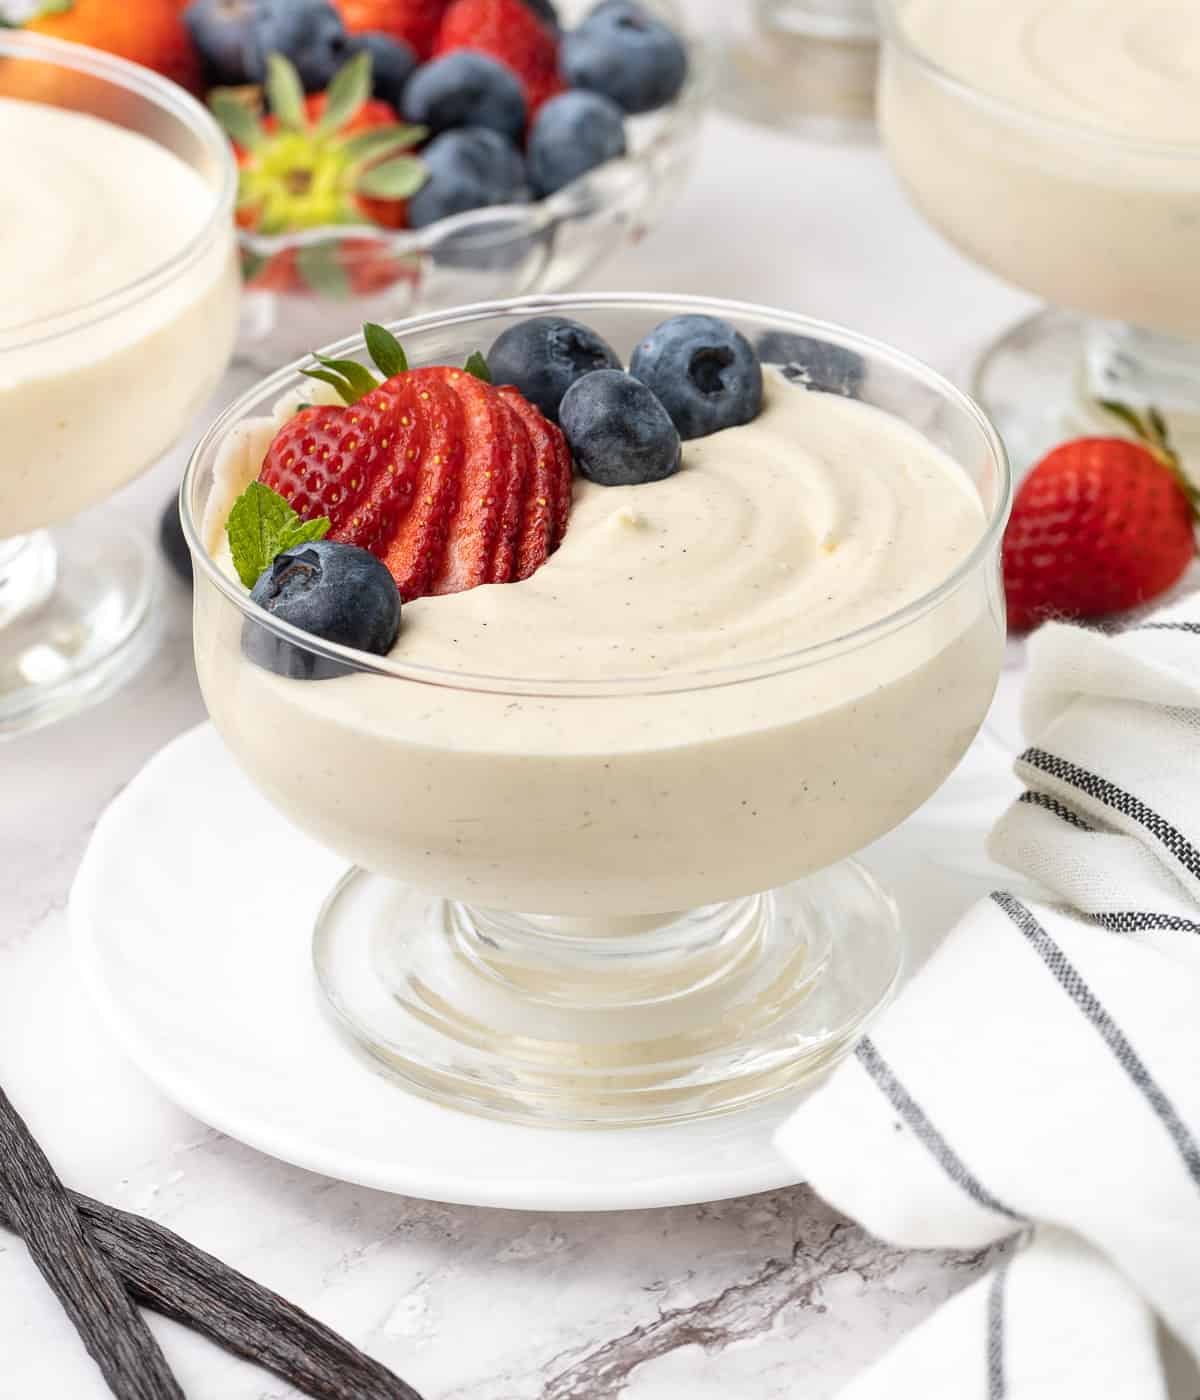 Mousse topped with fresh berries placed over a small white plate.